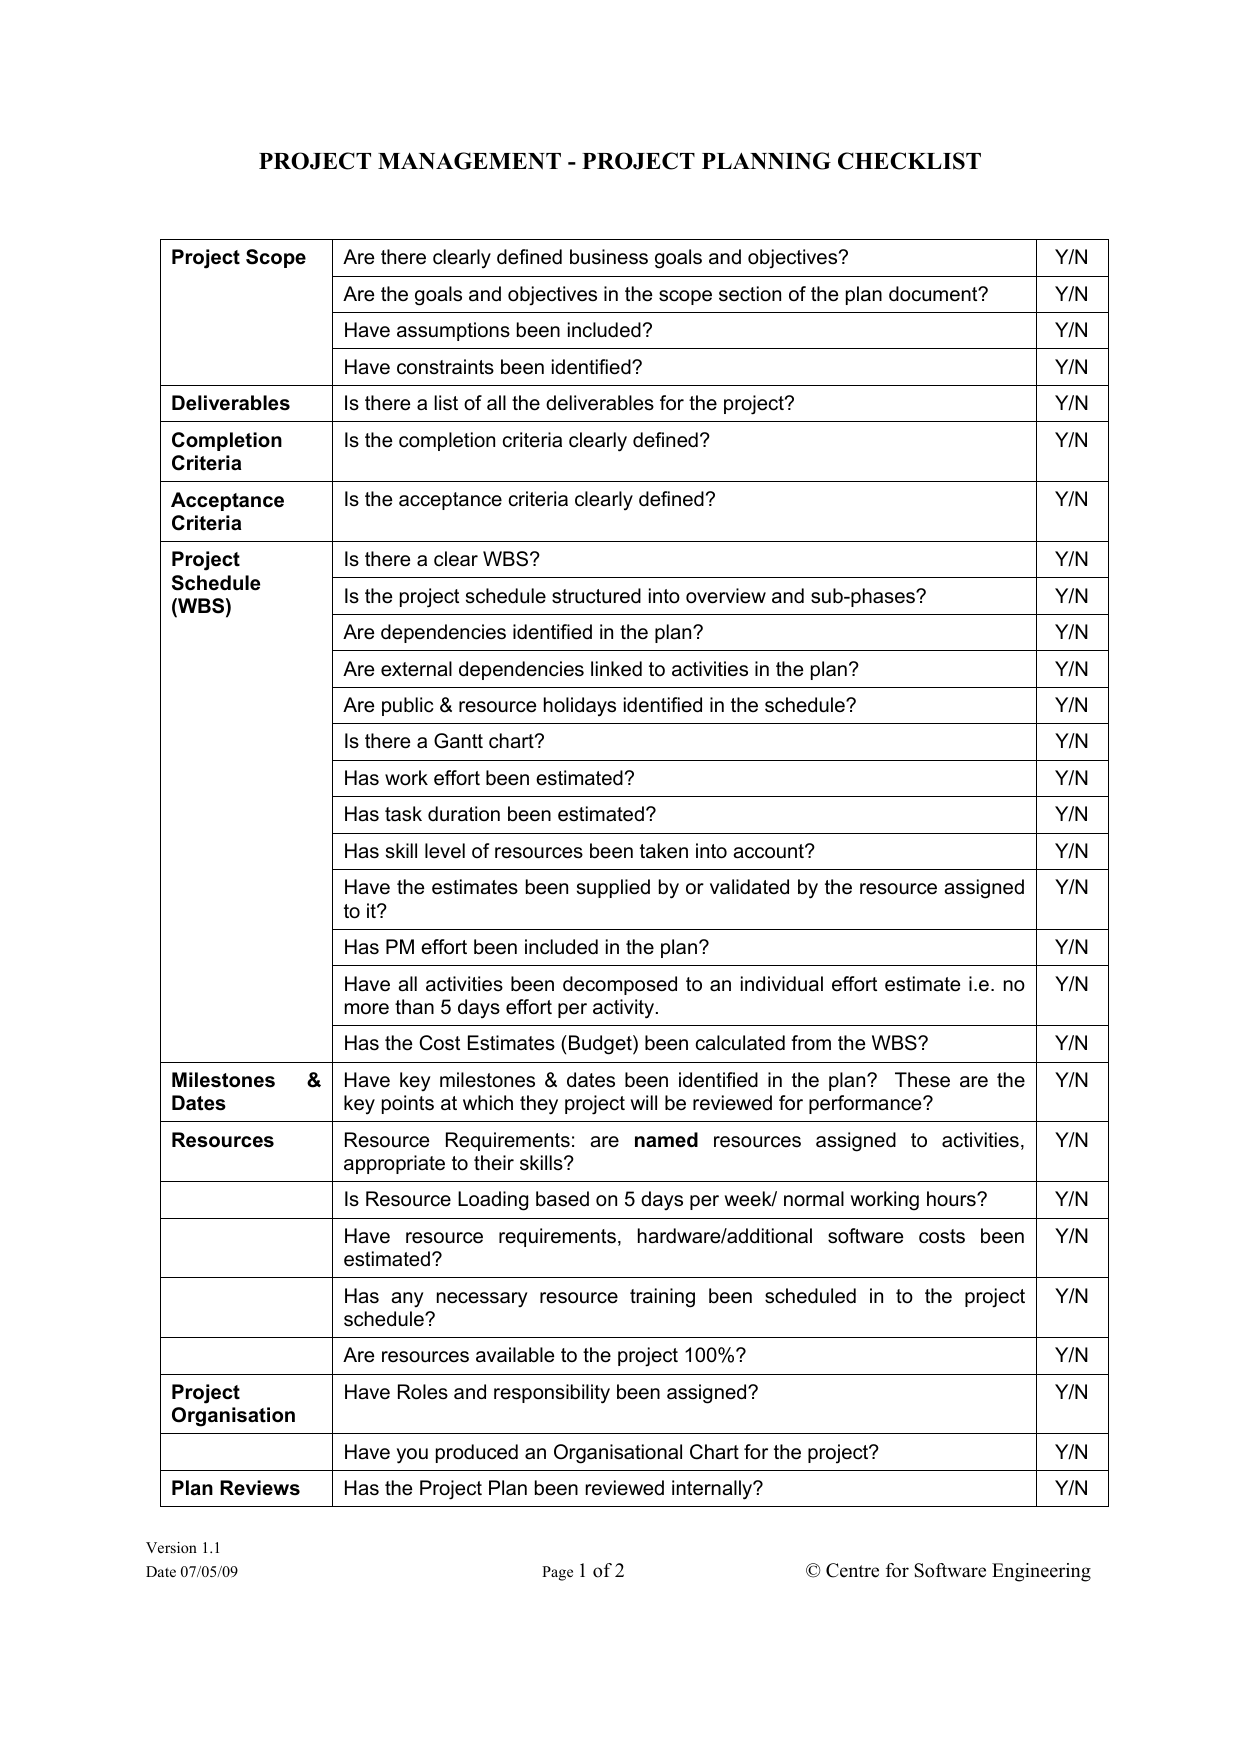 Download Project Checklist Template  Excel  PDF  RTF  Word  Regarding Checklist Project Management Template Throughout Checklist Project Management Template